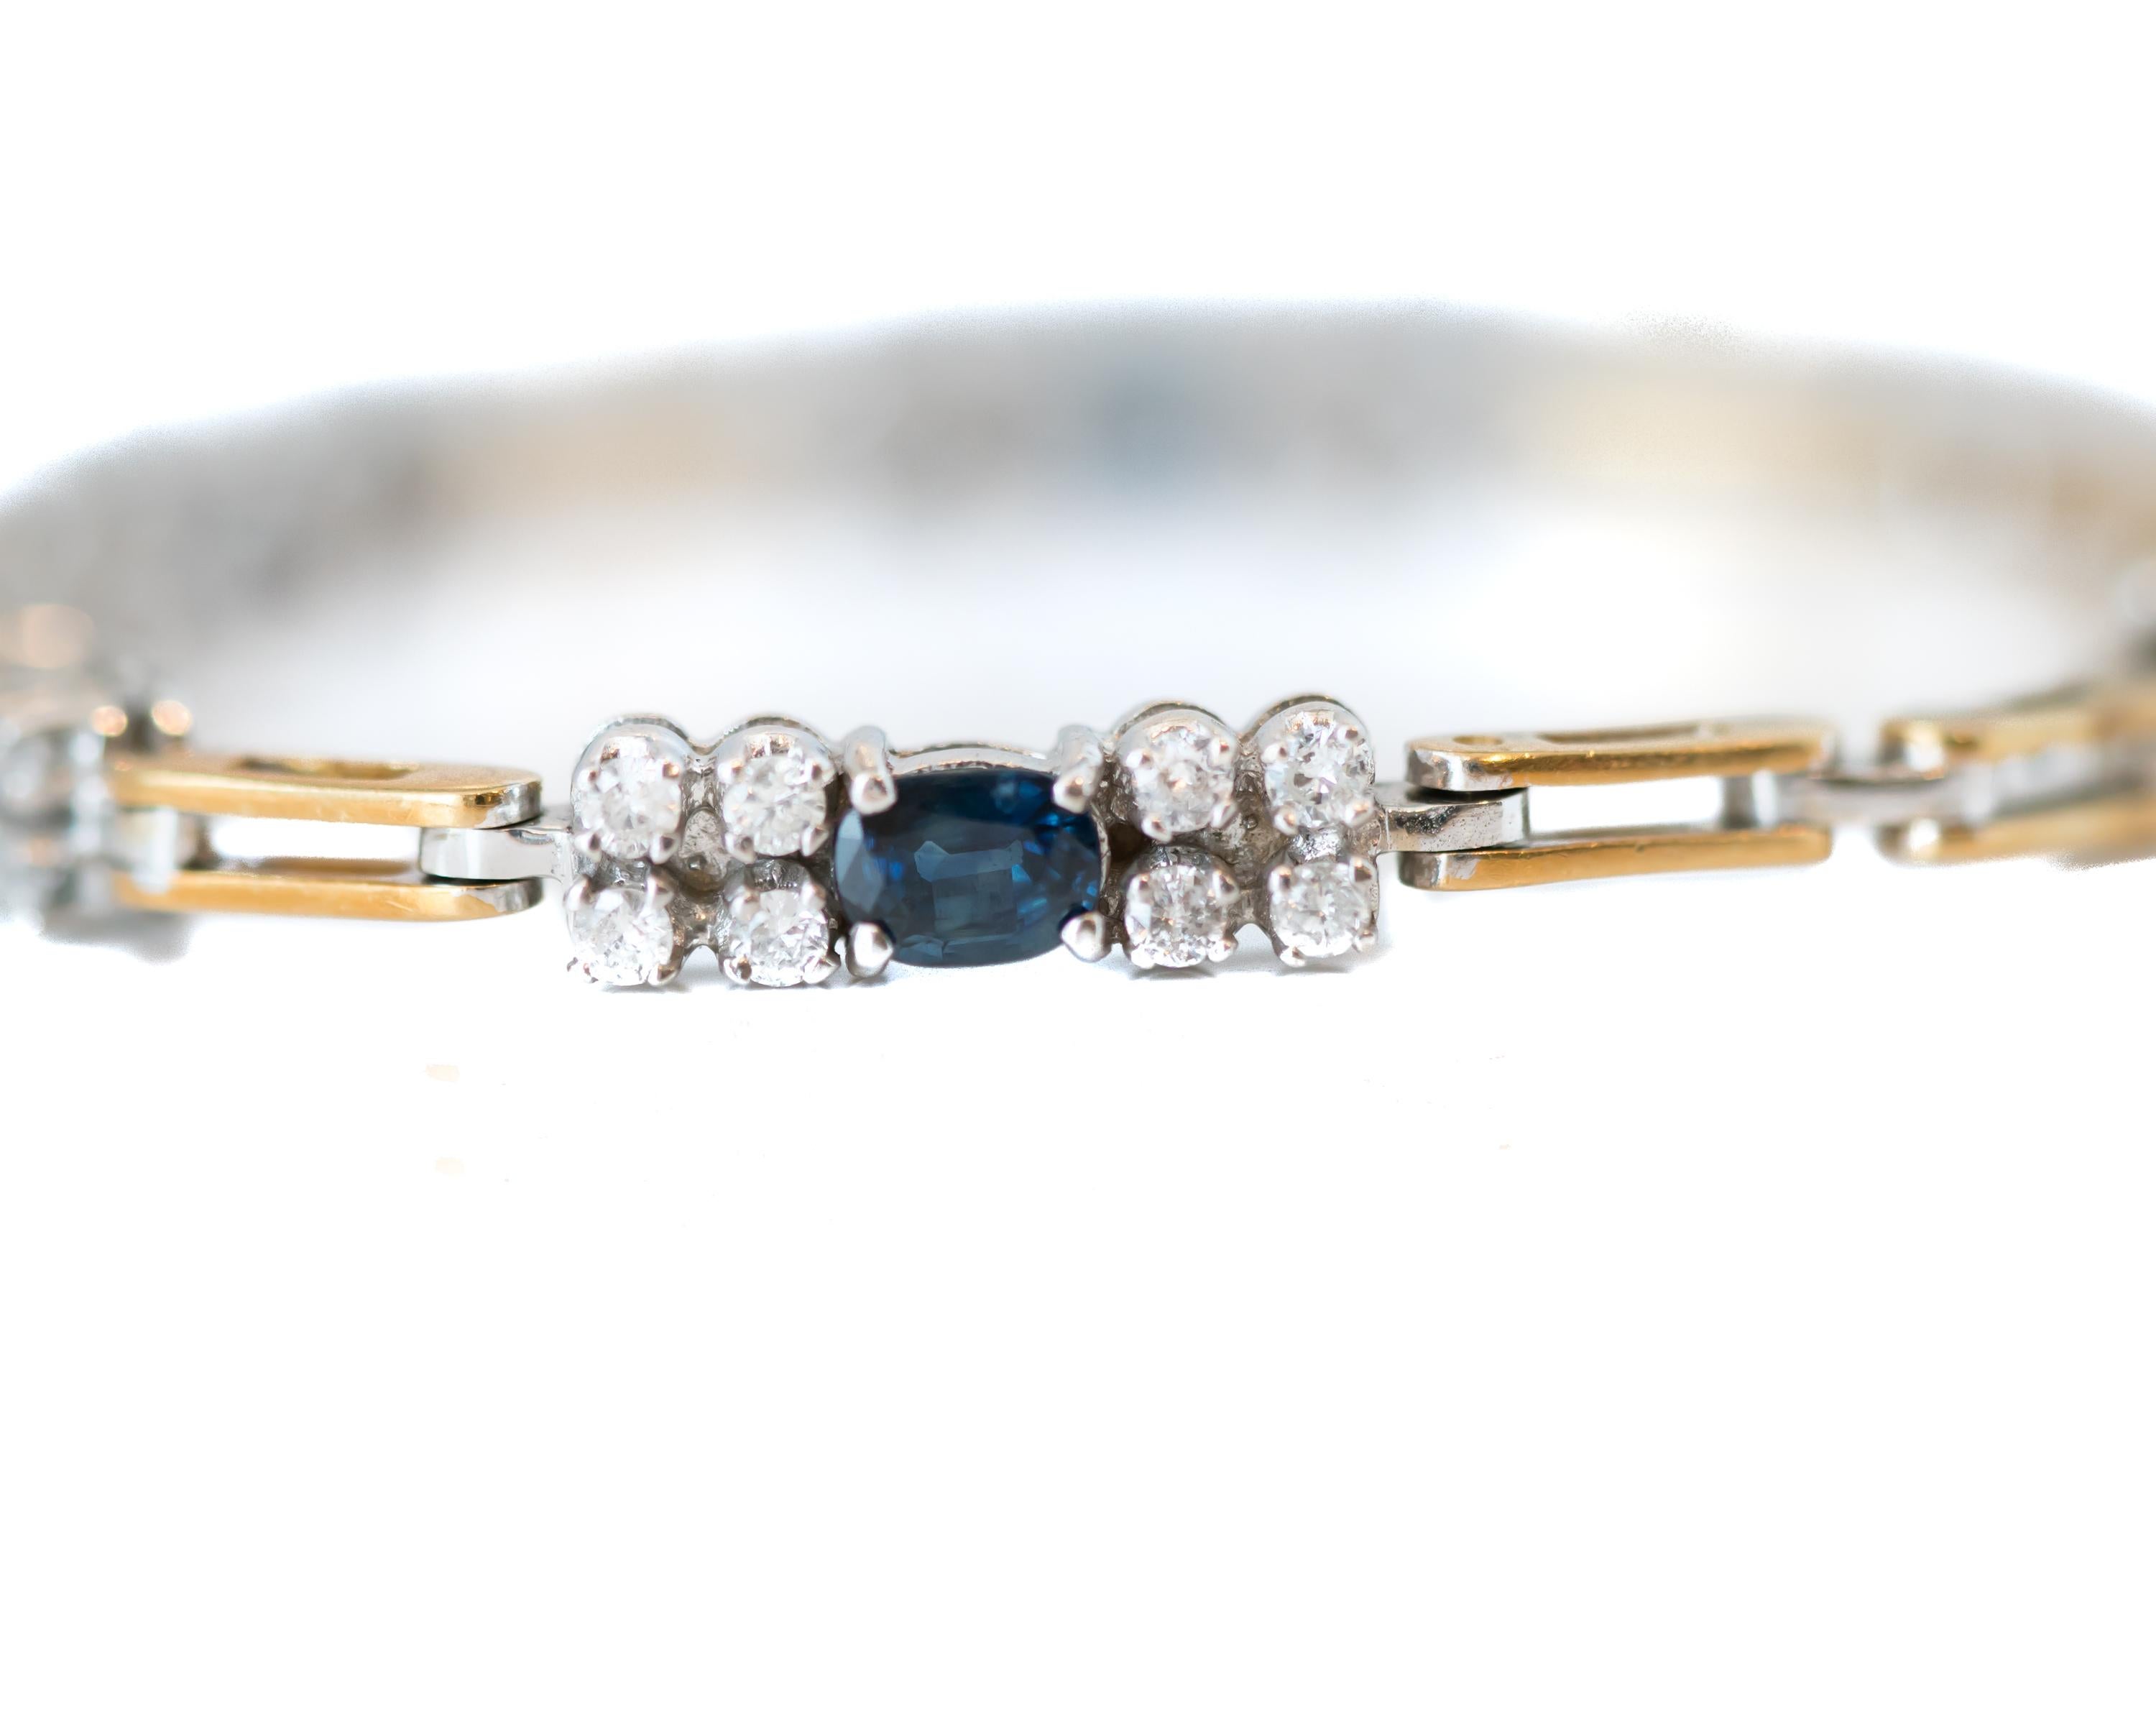 1980s Diamond and Sapphire, 18 Karat White and Yellow Gold Two Tone Link Bracelet

Features 32 Round Brilliant Diamonds and 4 Oval Sapphires. These gorgeous gemstones are set in White Gold and alternate with Yellow Gold links. Each of the 18 Karat